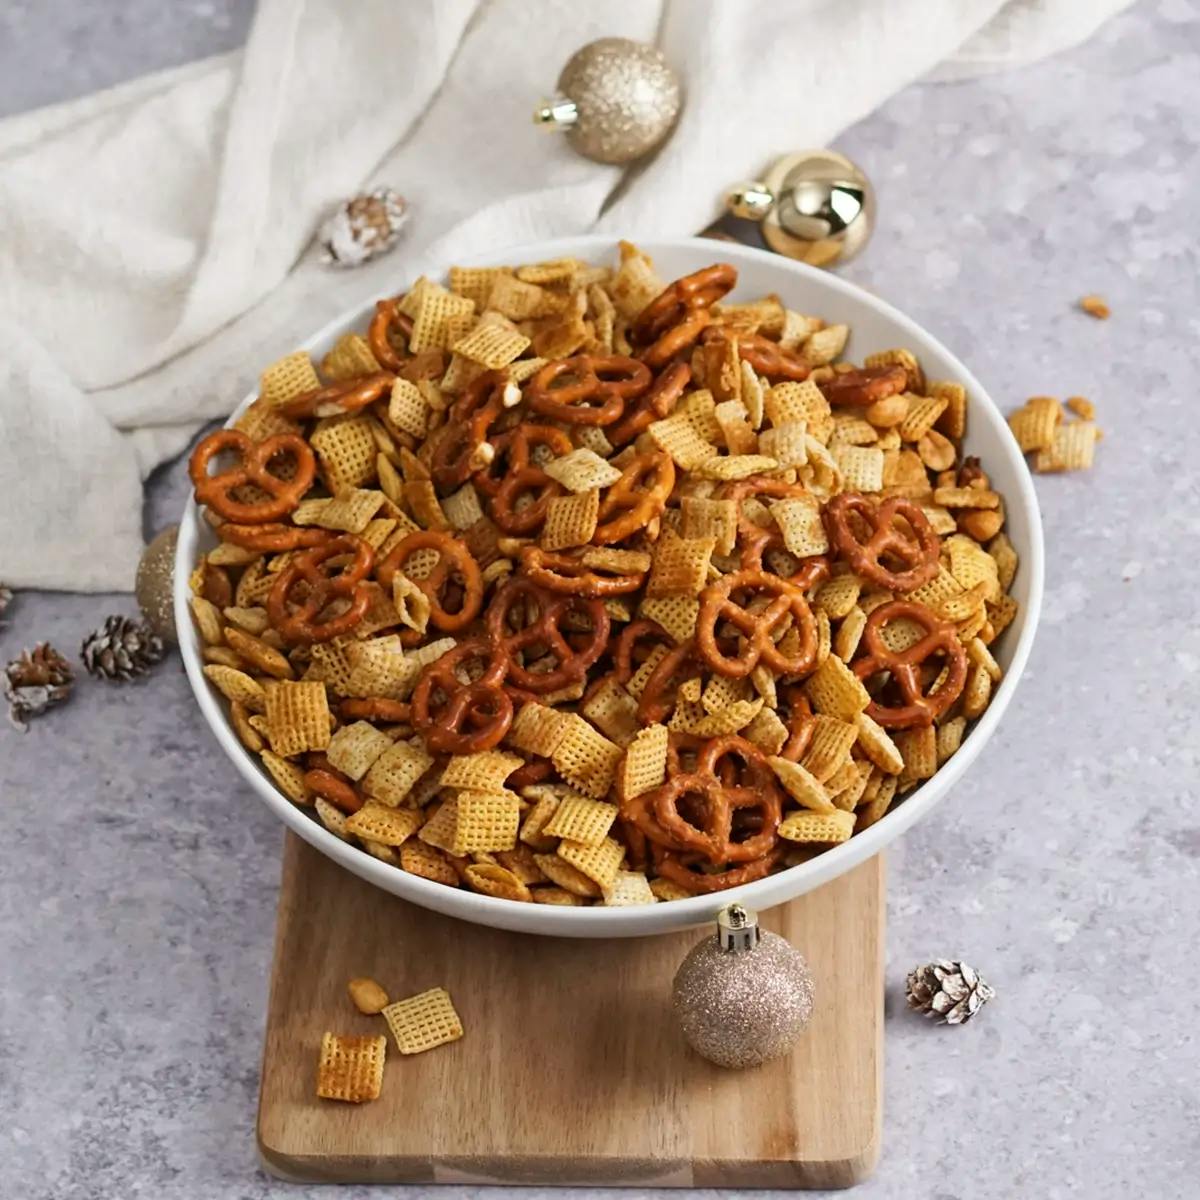 A bowl of savory gluten-free chex mix on a cutting board, surrounded by Christmas ornaments.